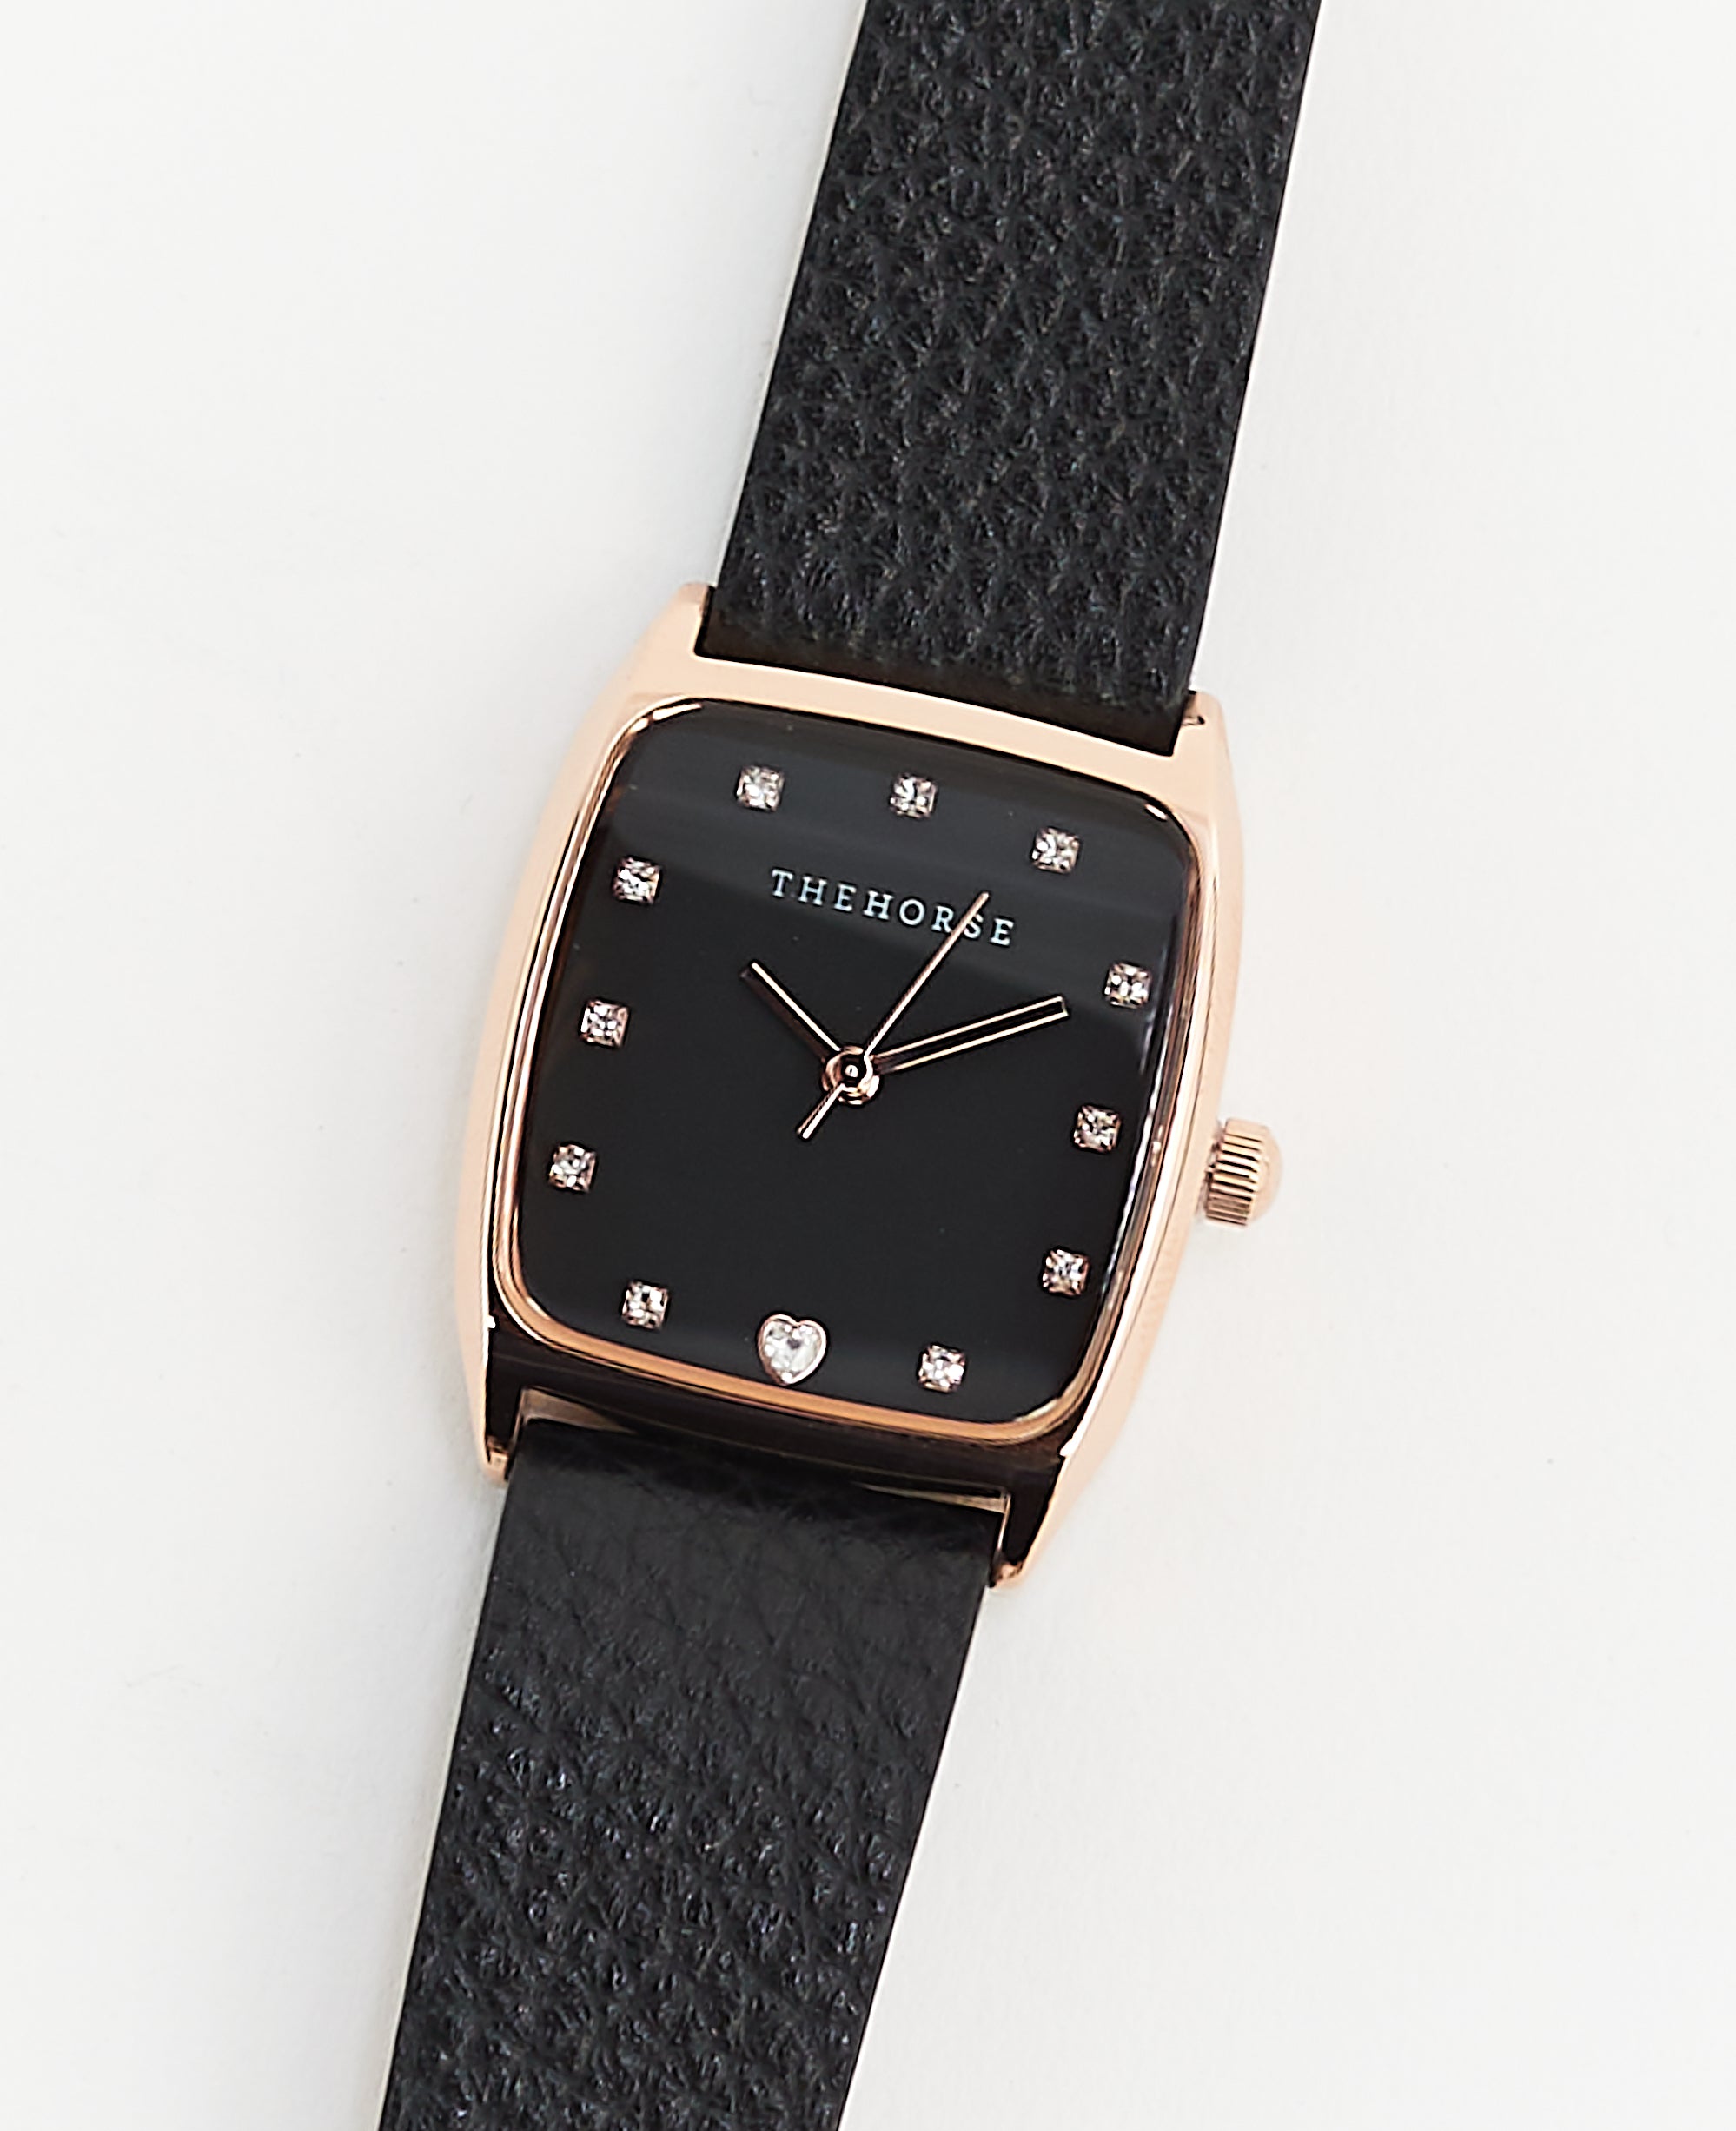 The Dress Watch: Rose Gold / Black Leather / With Stones